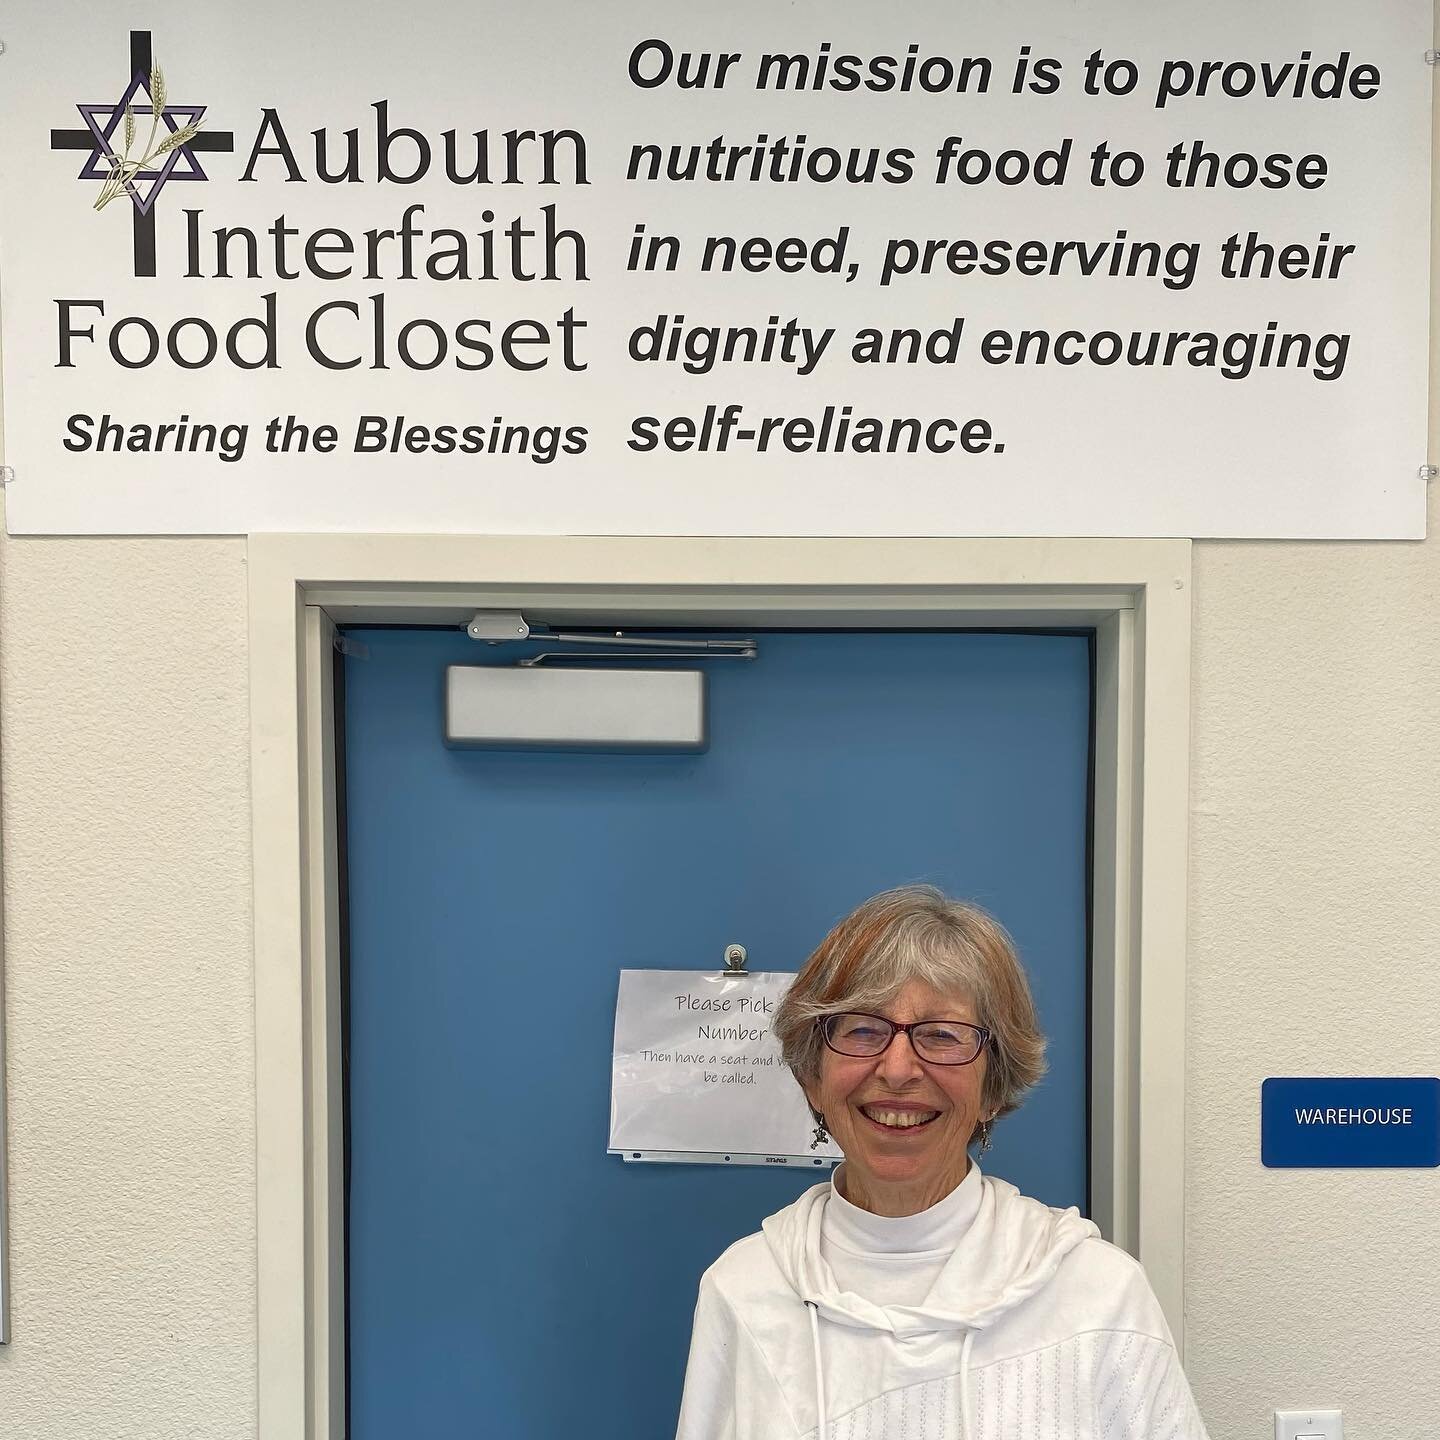 We are blessed to be partners with the Auburn Interfaith Food Closet.